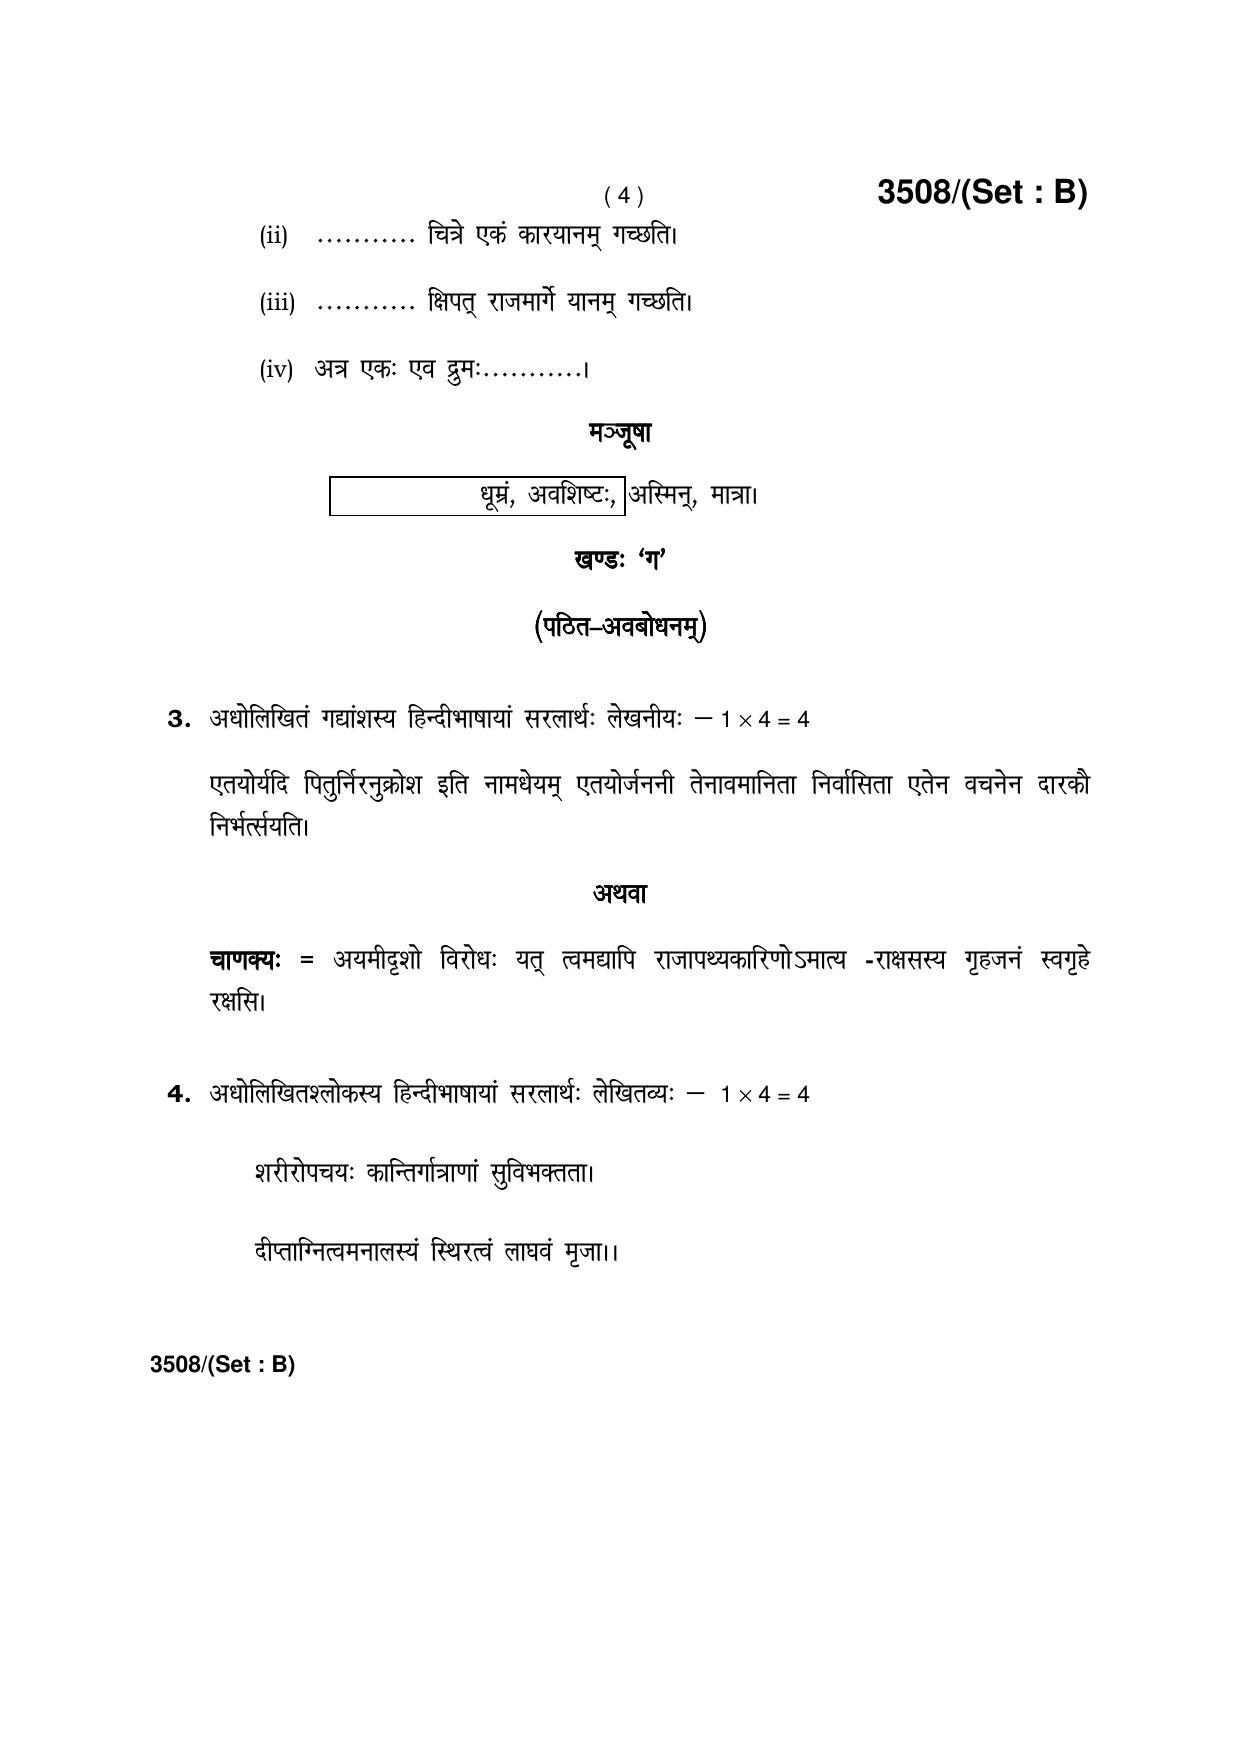 Haryana Board HBSE Class 10 Sanskrit -B 2018 Question Paper - Page 4